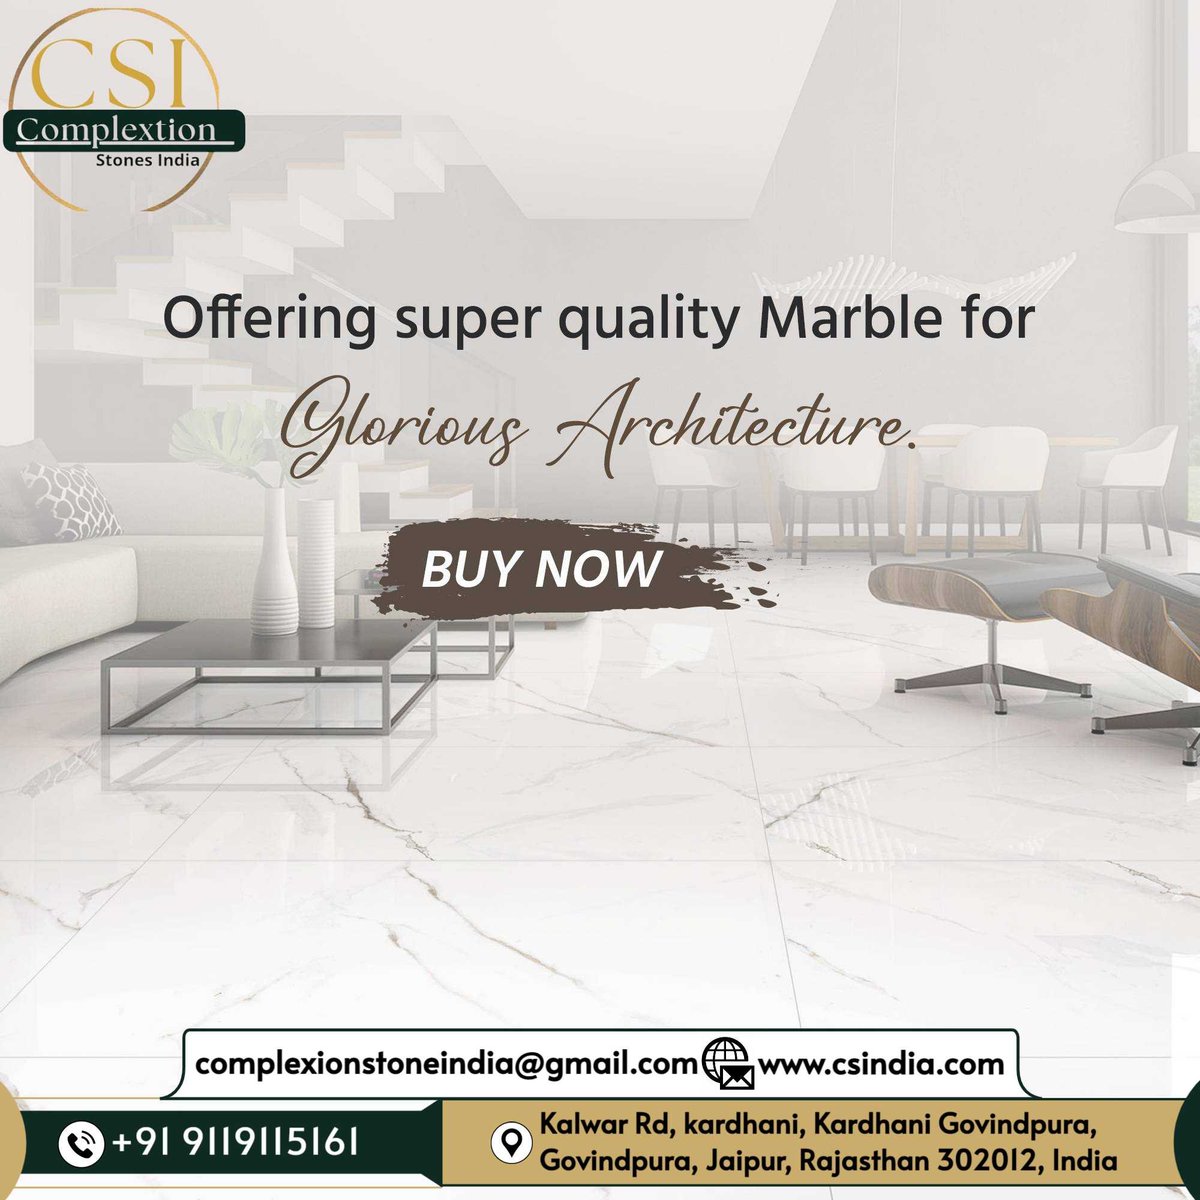 We offering super quality Marbles for Glorious Architecture For Your Exports Quality.  

Complexionstonesindia@gmail.com  +91 91191 15161 

#bestqualitystone #naturalstone #marbleslabs #redtravertine #Beigemarble #marbleexport #Scindia#Csindia #complexionperfection